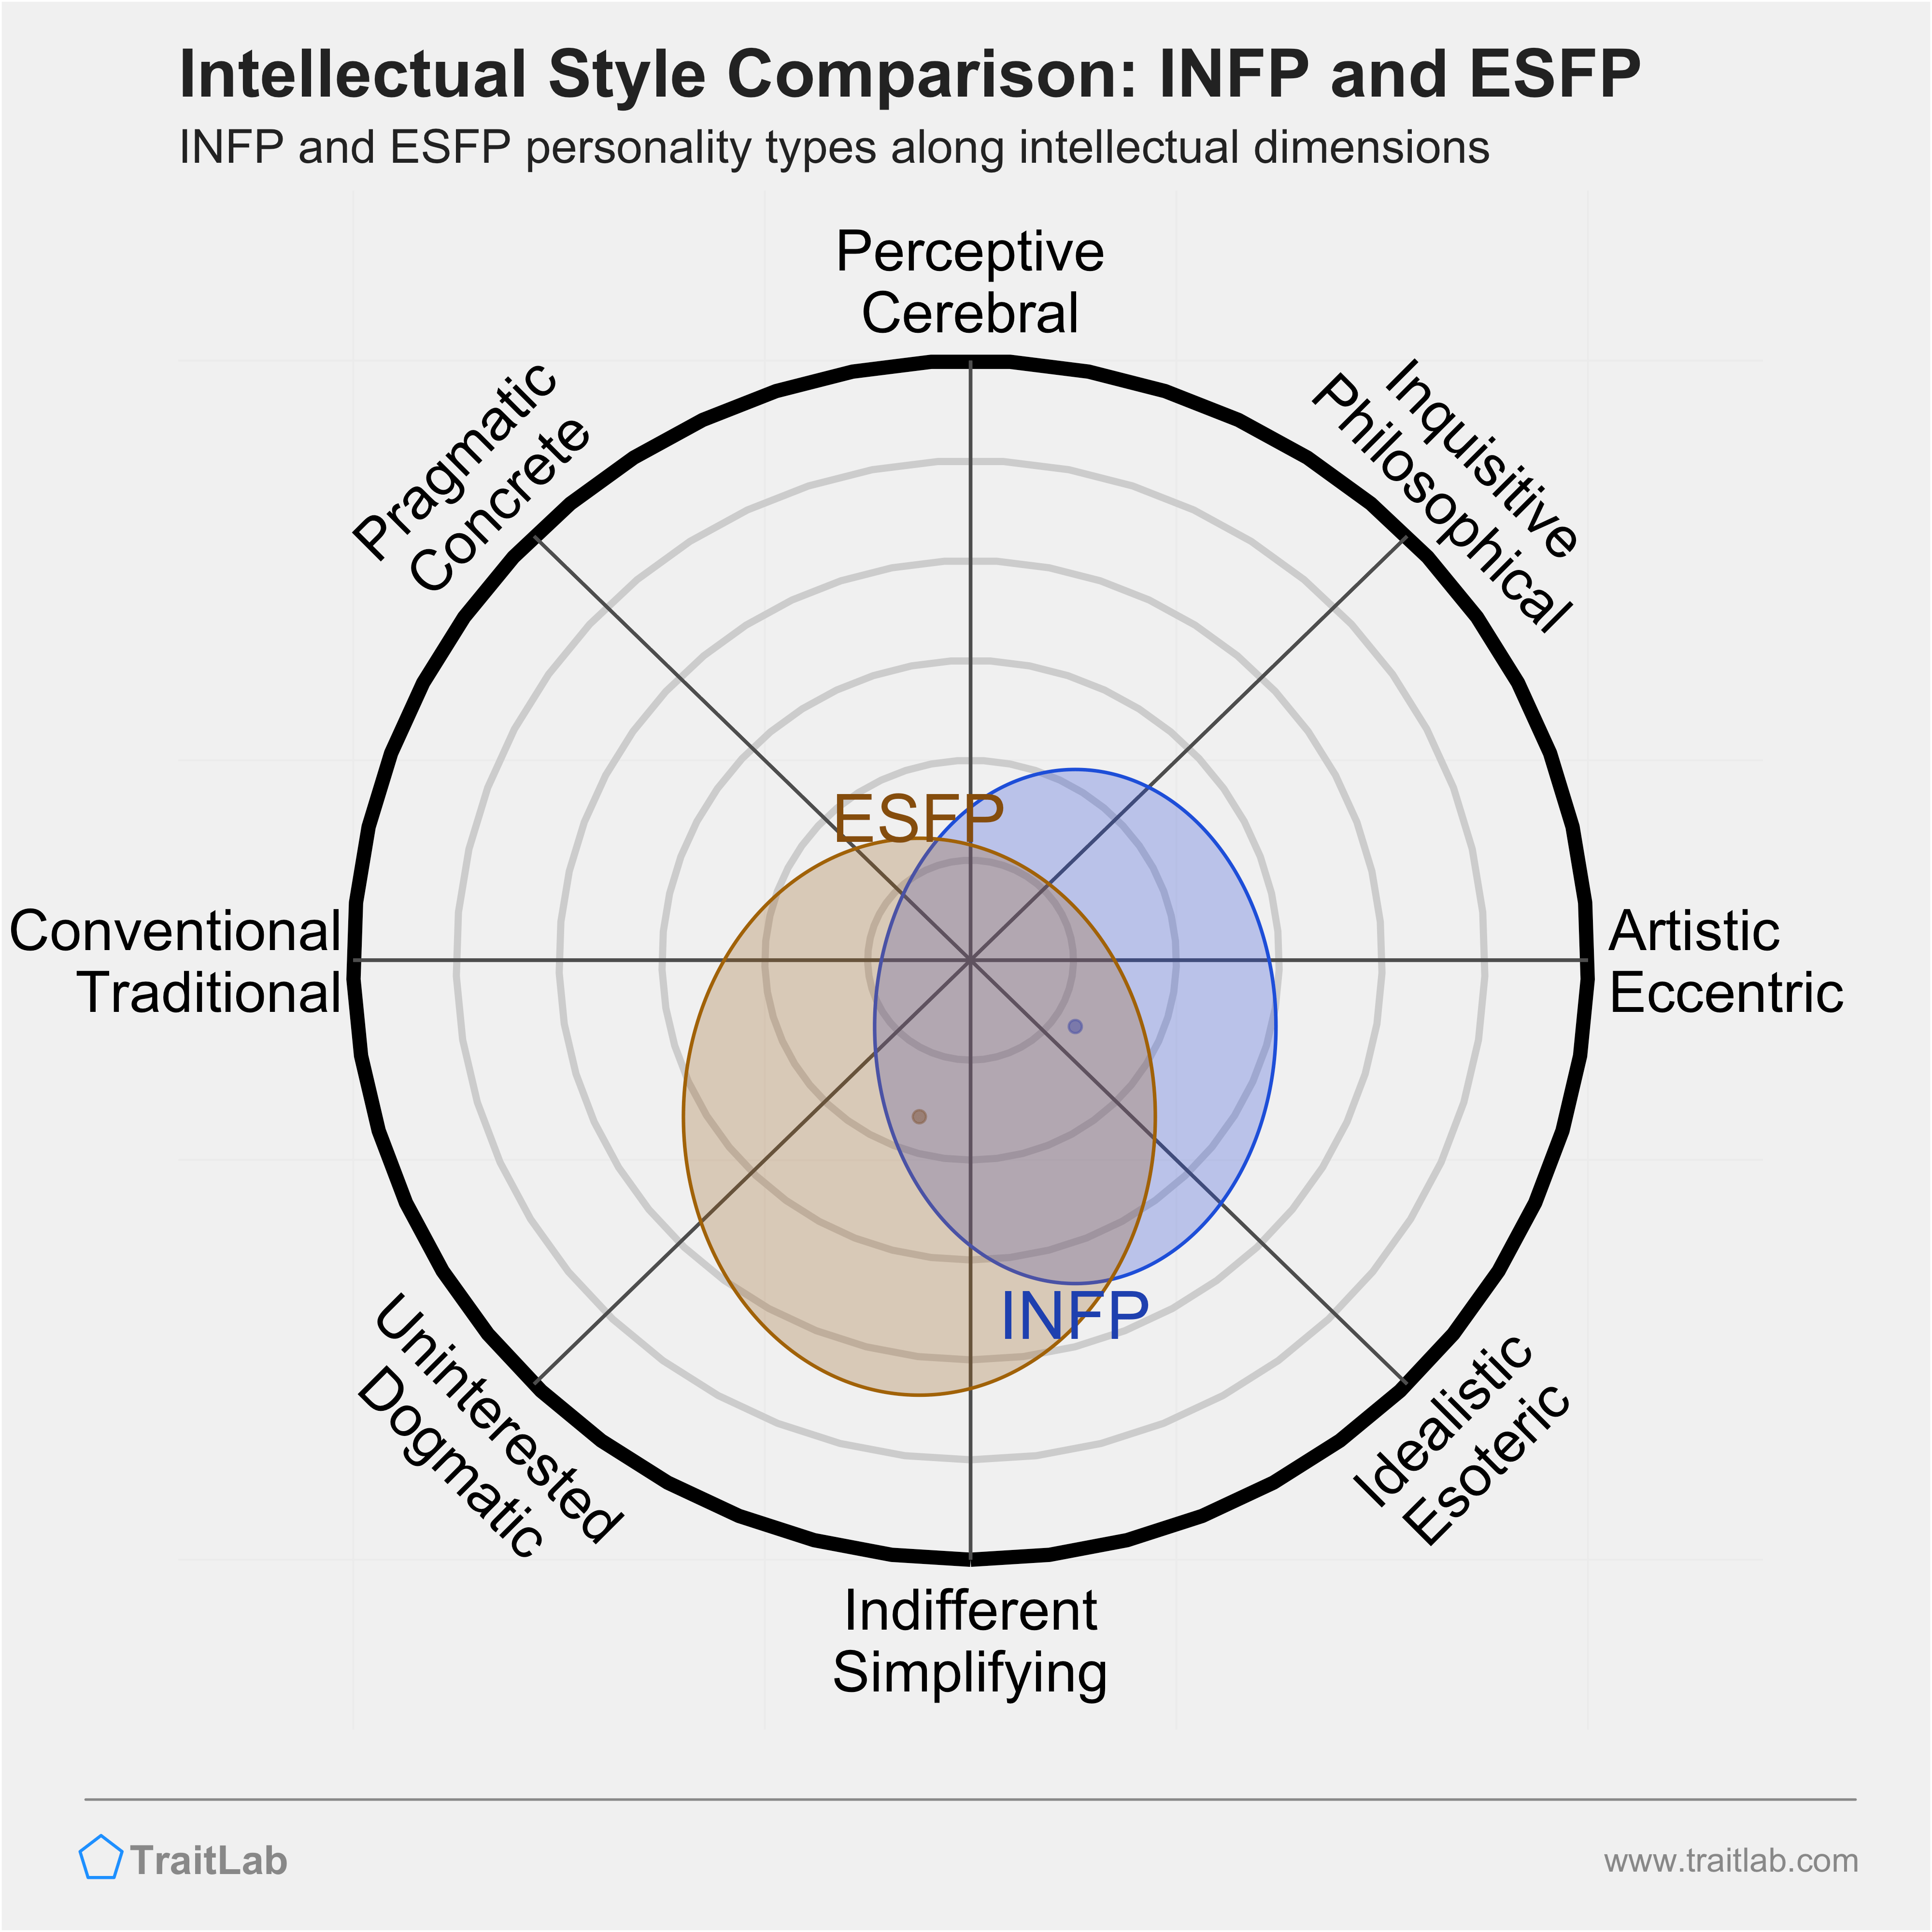 INFP and ESFP comparison across intellectual dimensions